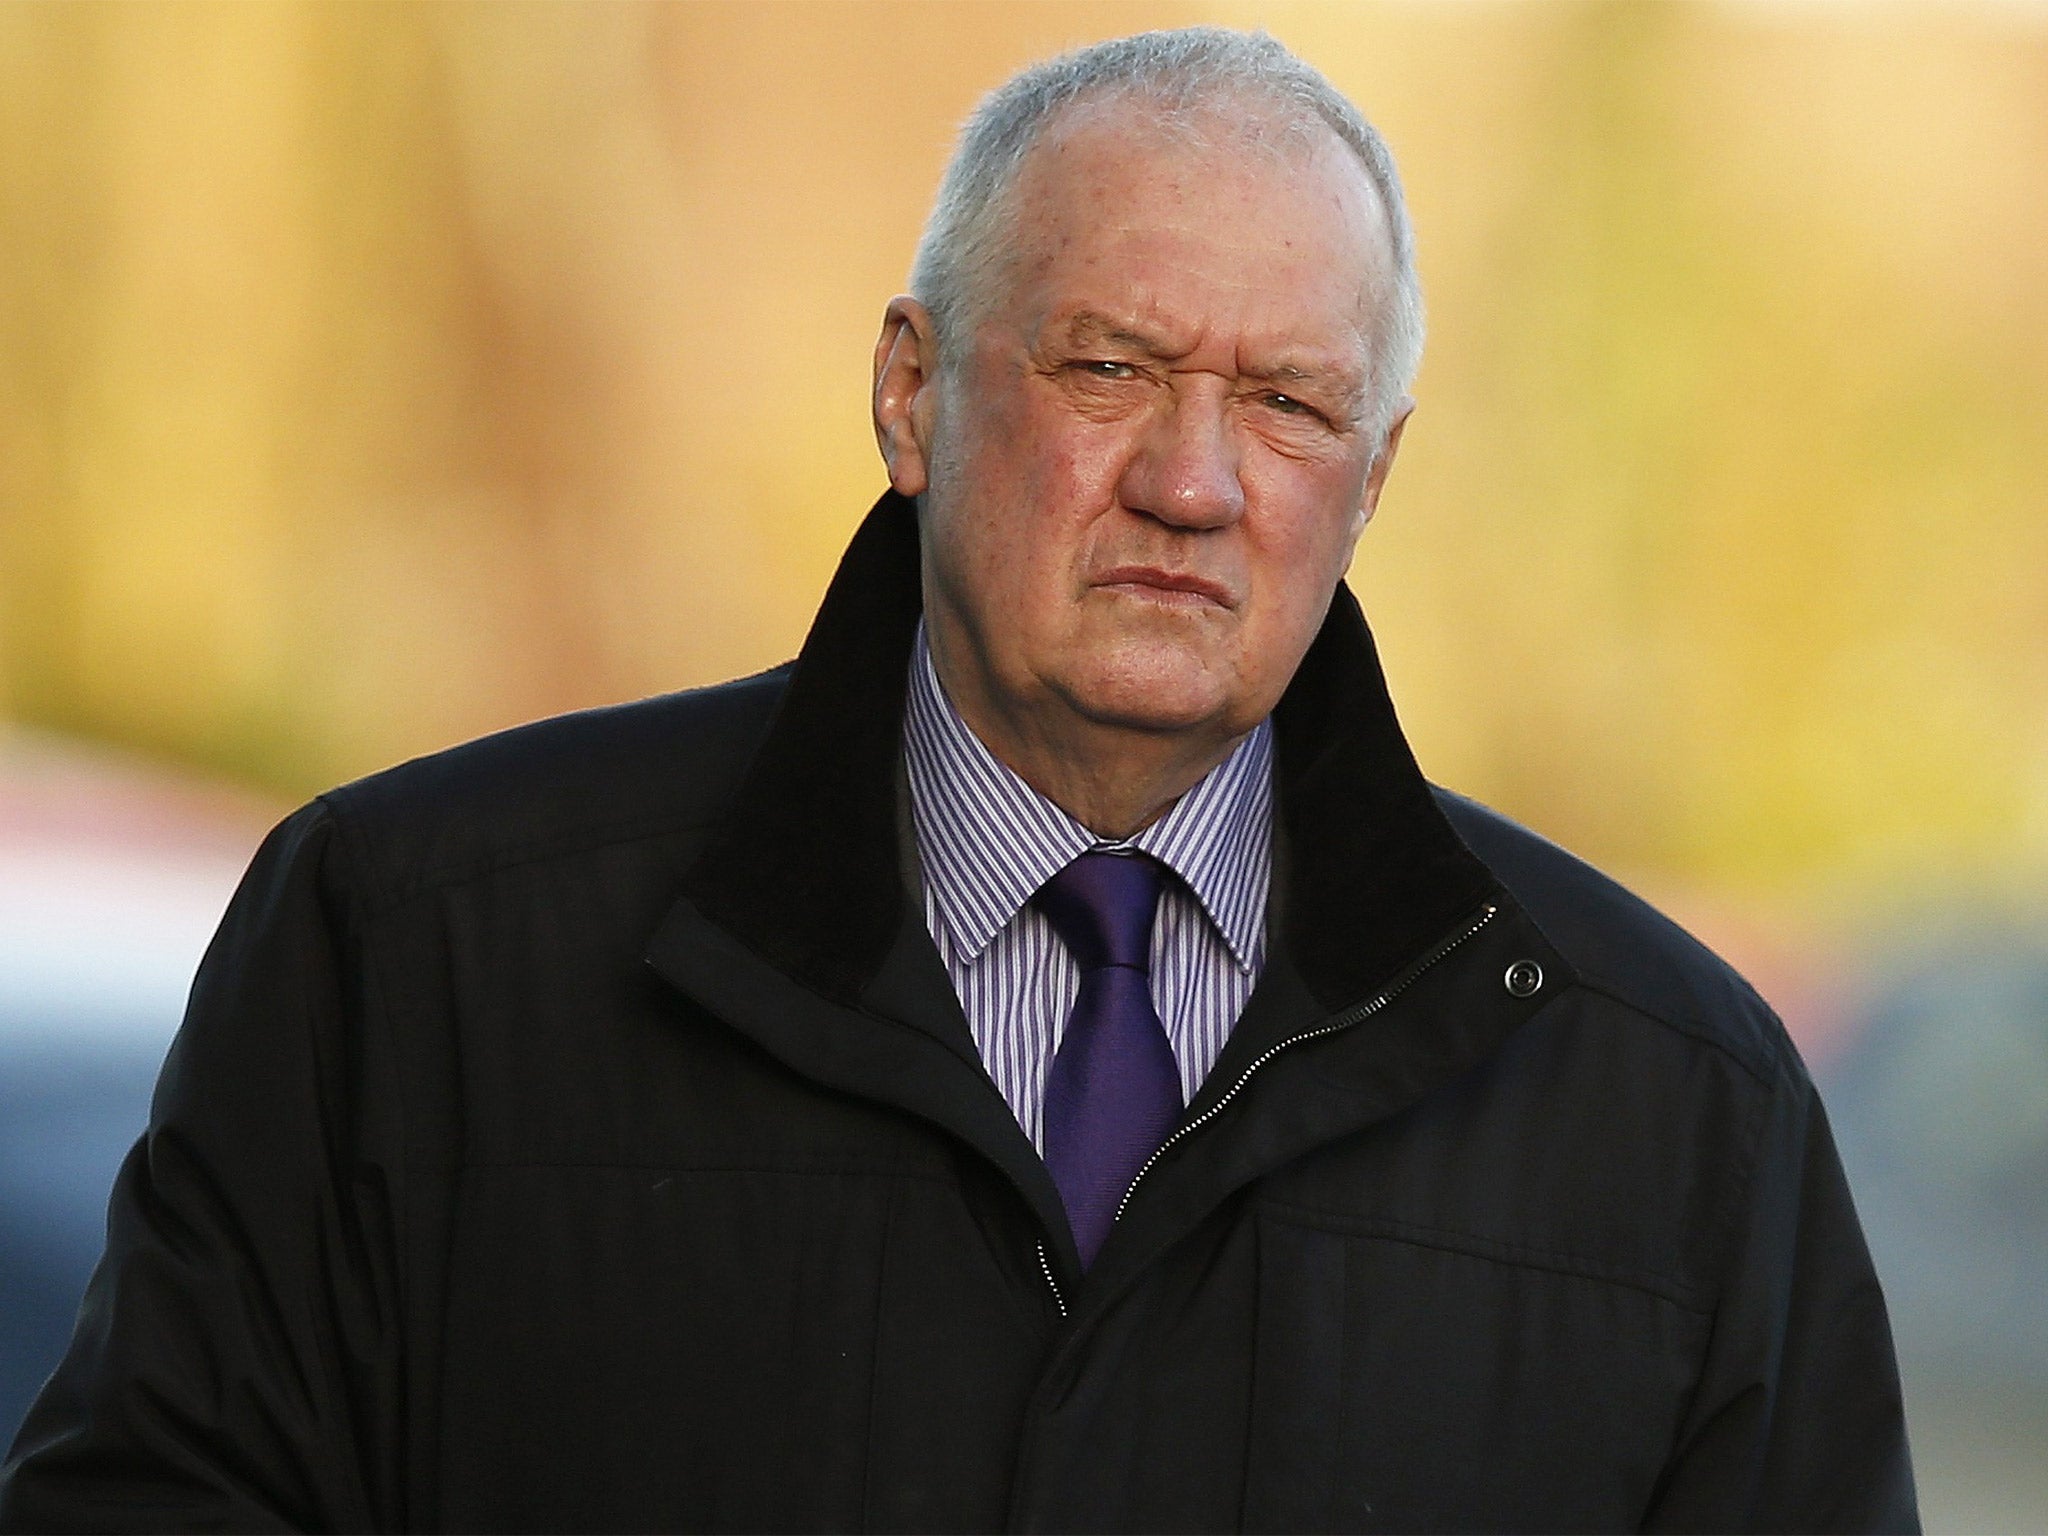 David Duckenfield, former Chief Super-intendent of South Yorkshire Police and the Hillsborough match commander, arrives to give evidence in Warrington